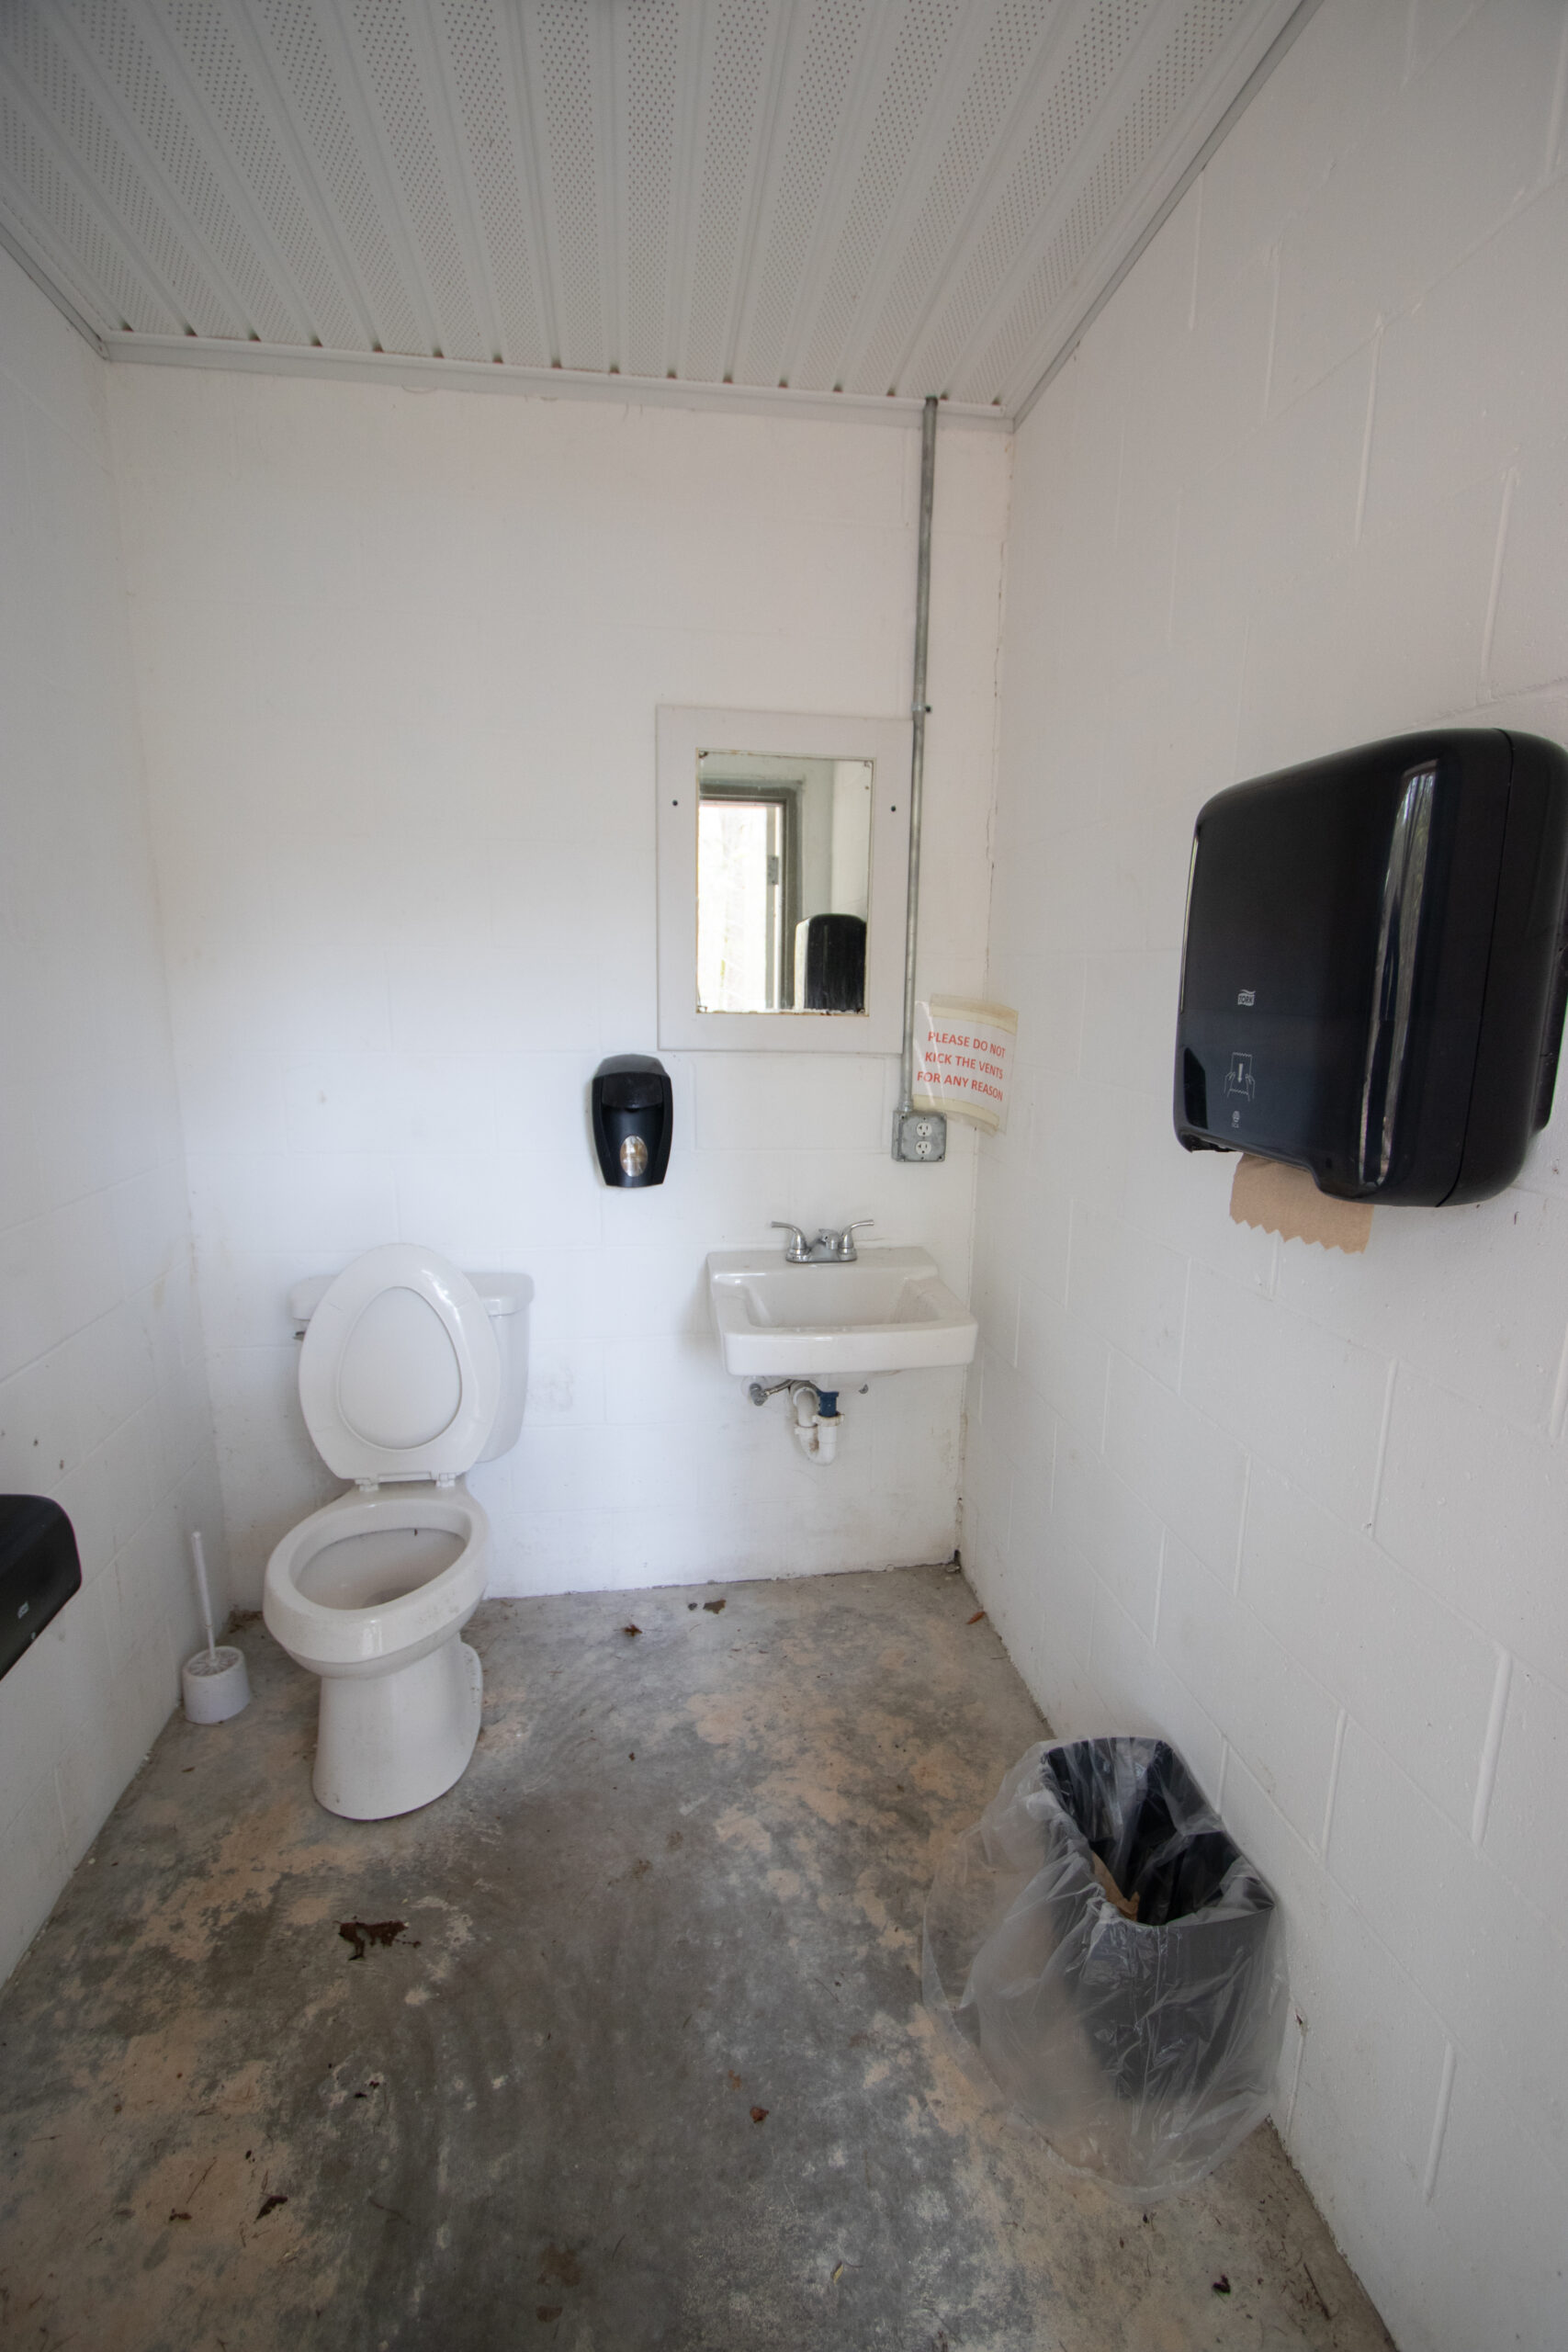 We have many hot showers and toilets available at our site between 3 bathhouses from May through October events. After the weather reaches the freezing point, 2 hot showers and limited toilet facilities will be available within the bathhouse located near Logistics.